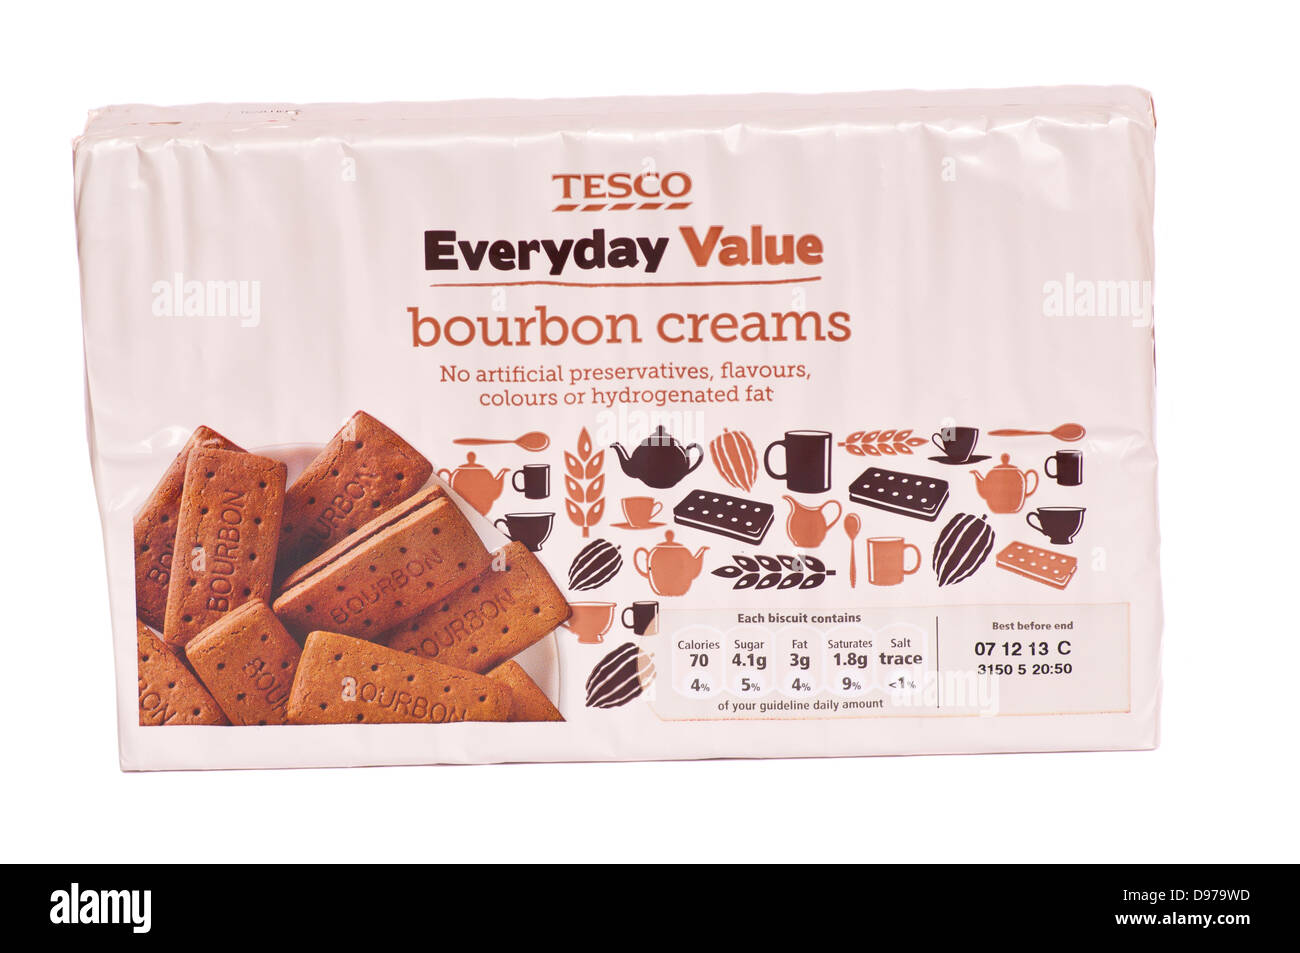 Packet Of Tesco Own Brand Everyday Value Bourbon Cream Biscuits Stock Photo